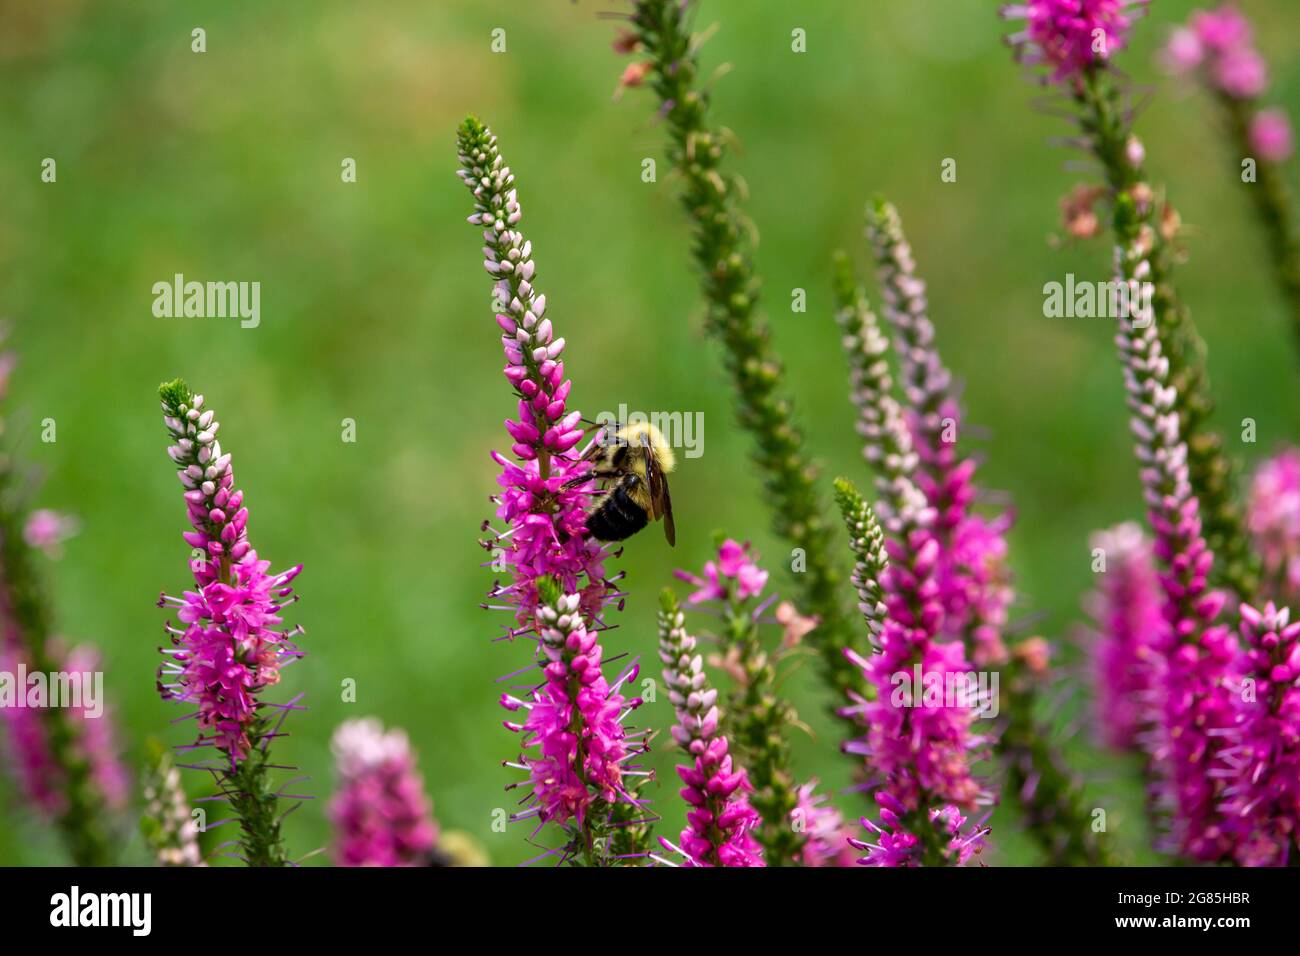 Macro view of a bumblebee feeding on the flower blossoms of an attractive spiked speedwell (veronica spicata) plant Stock Photo